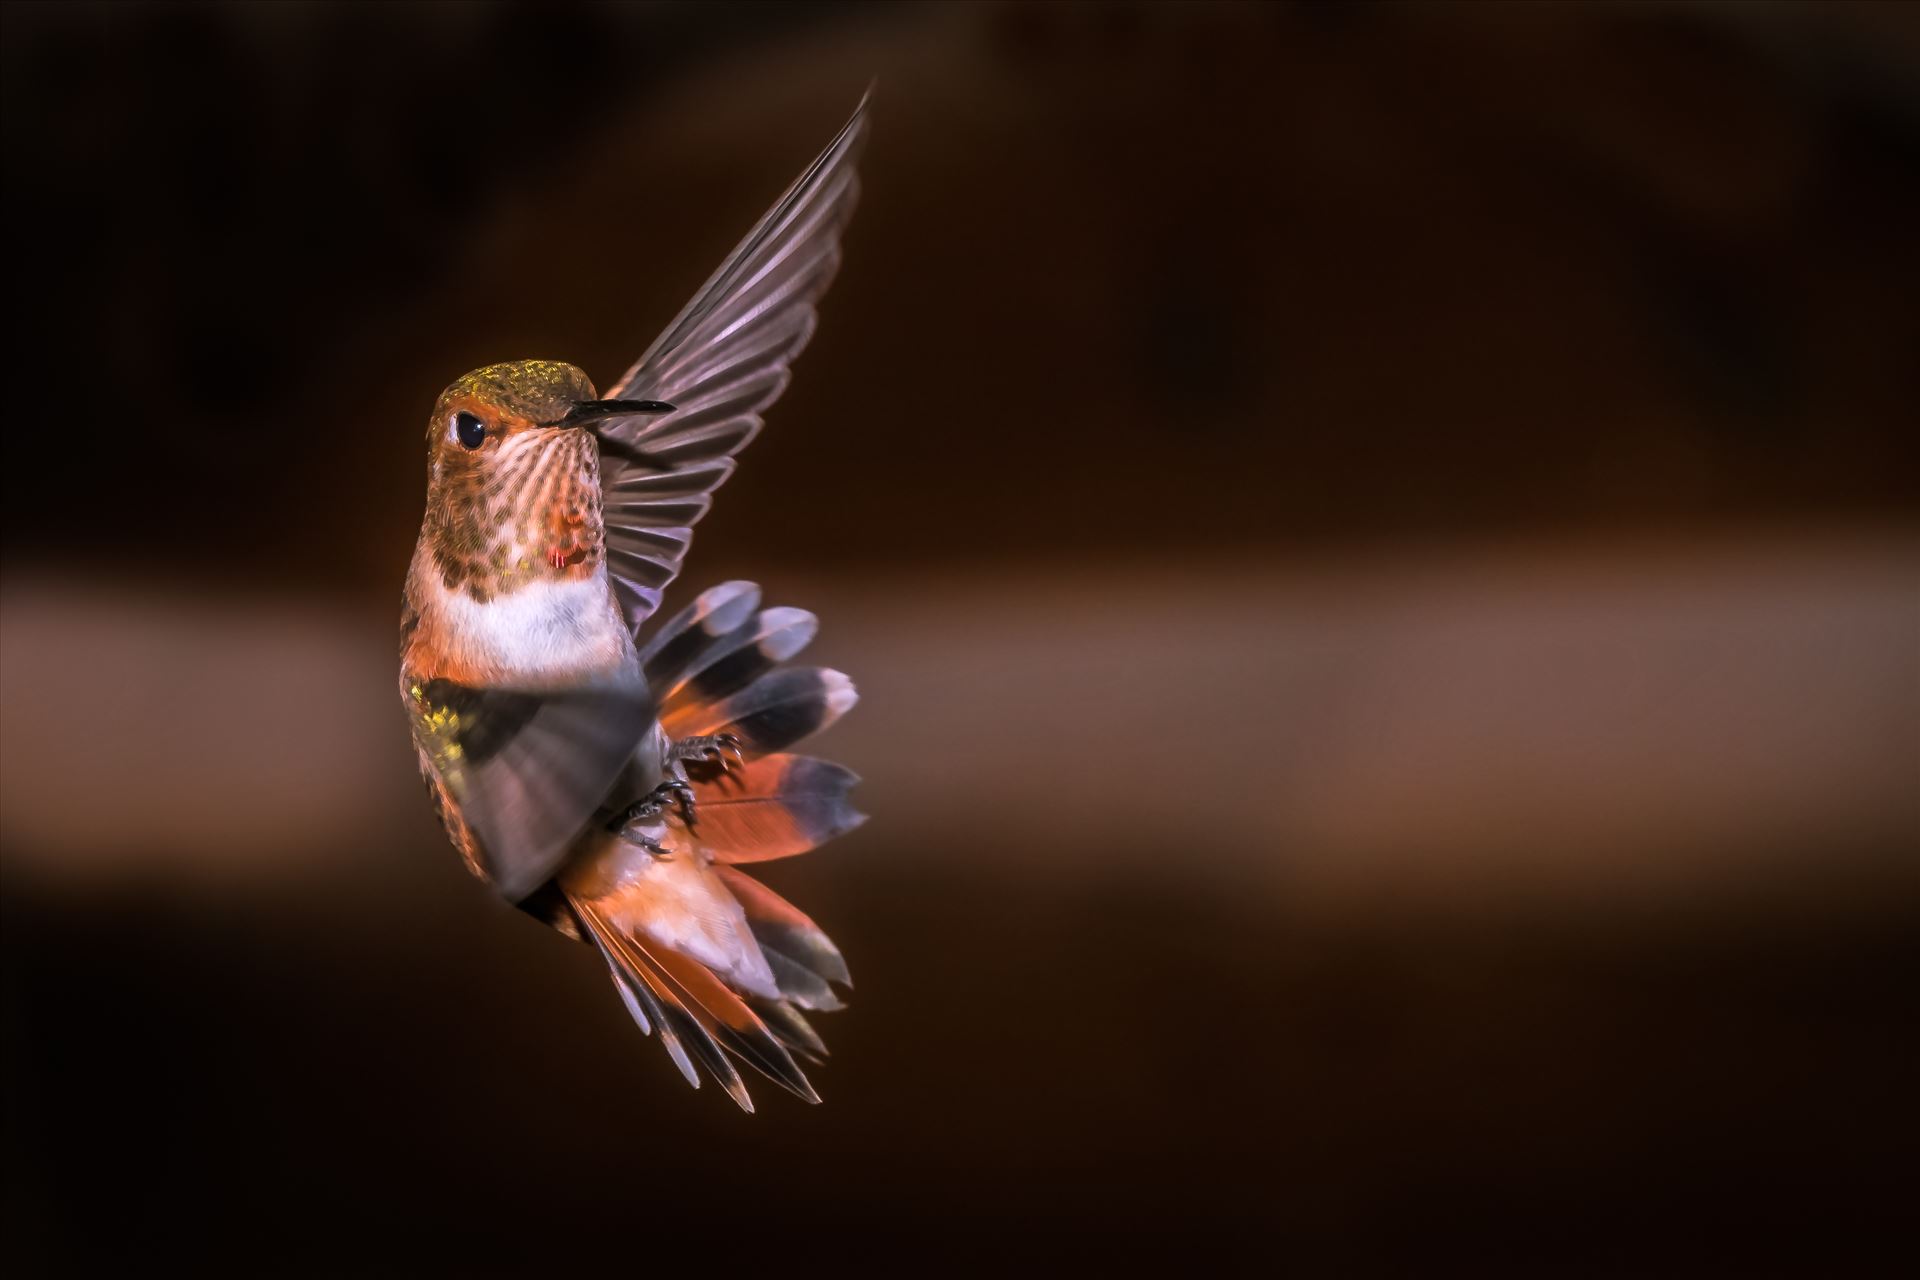 hummingbird in making turn in flight 8500639 ss as sf.jpg - hummingbird making sharp turn while in flight, Cloudcroft New Mexico by Terry Kelly Photography